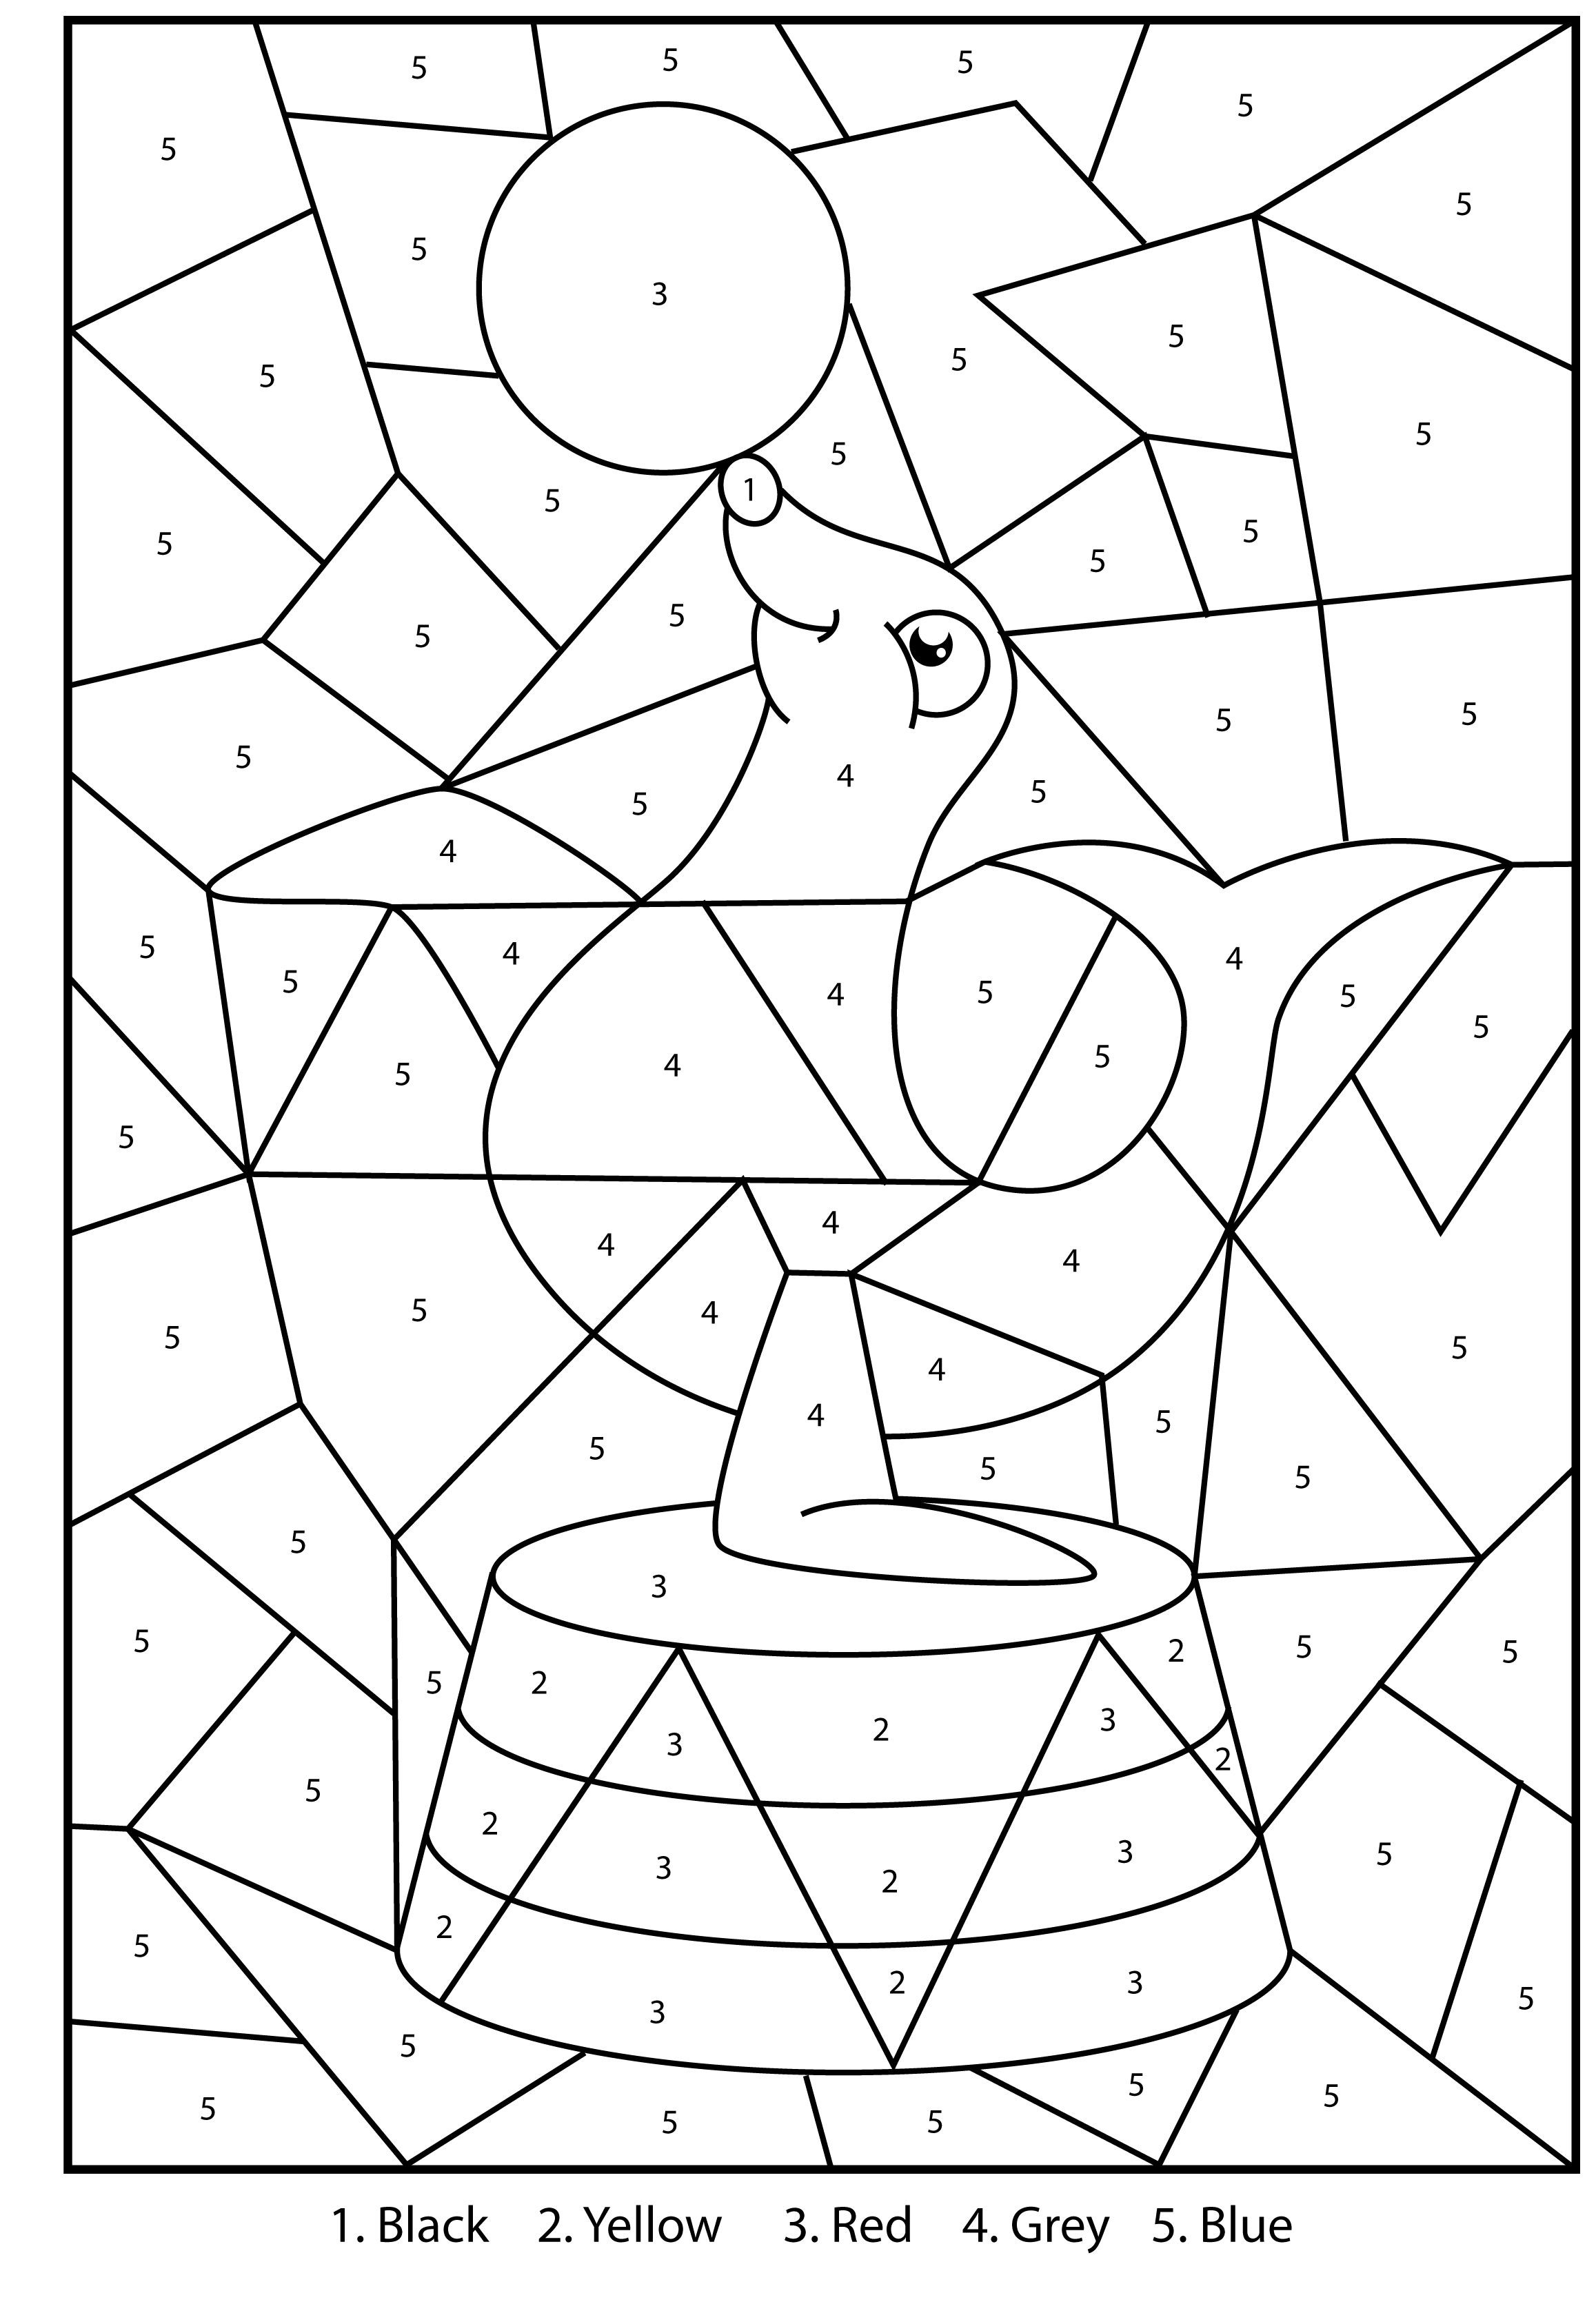 30 Of The Best Ideas For Coloring By Number Pages For Boys Home Inspiration And Ideas DIY